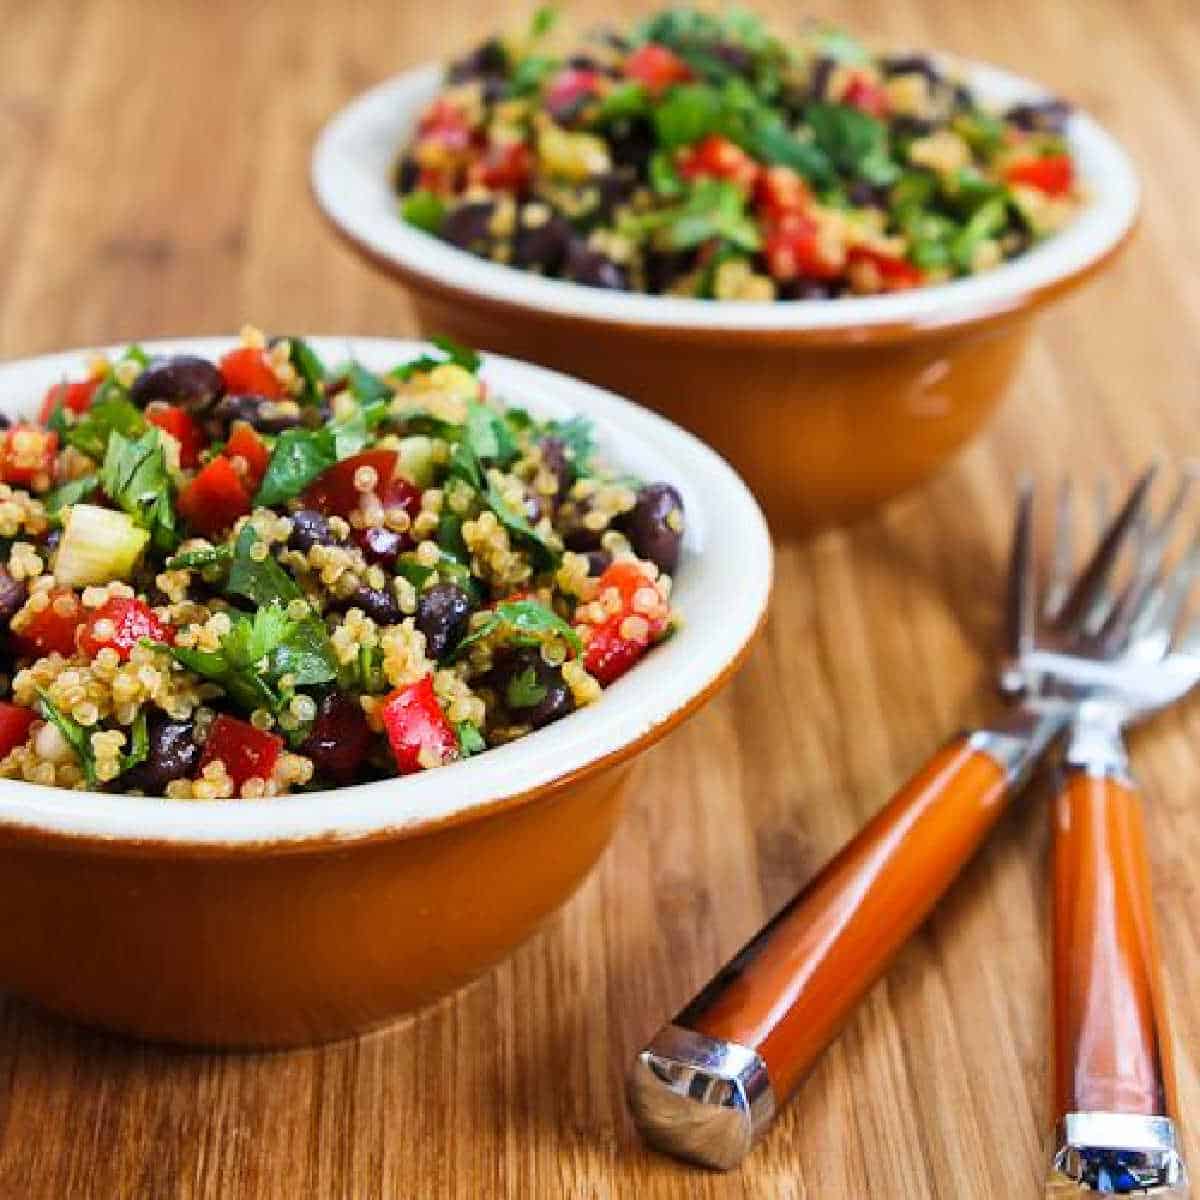 Southwestern quinoa salad served in two bowls with forks